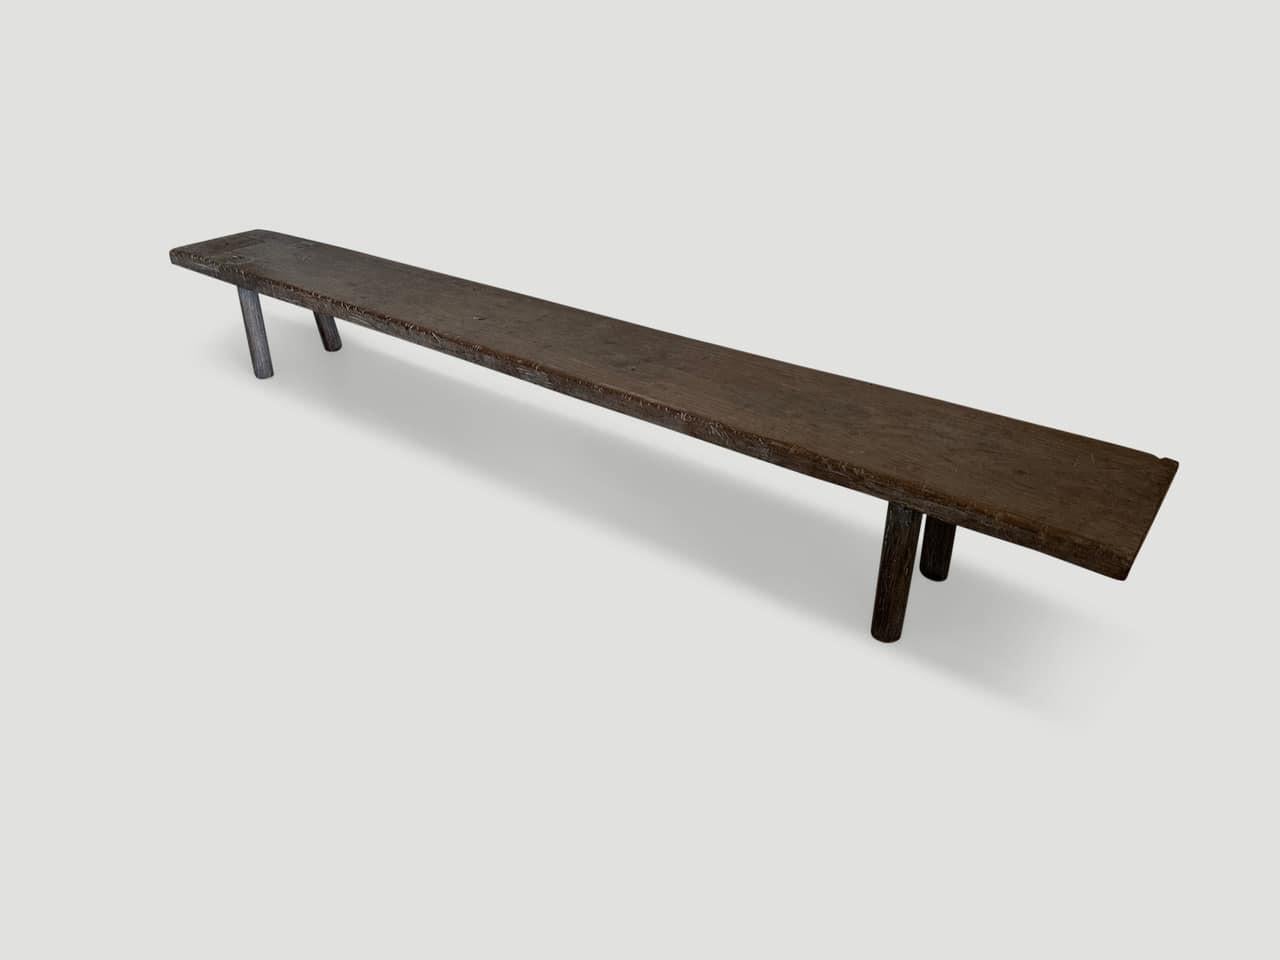 Antique bench made from a century old two inch thick panel with beautiful patina. We added smooth teak cylinder legs. Perfect for inside or outside living.

This bench was hand made in the spirit of Wabi-Sabi, a Japanese philosophy that beauty can